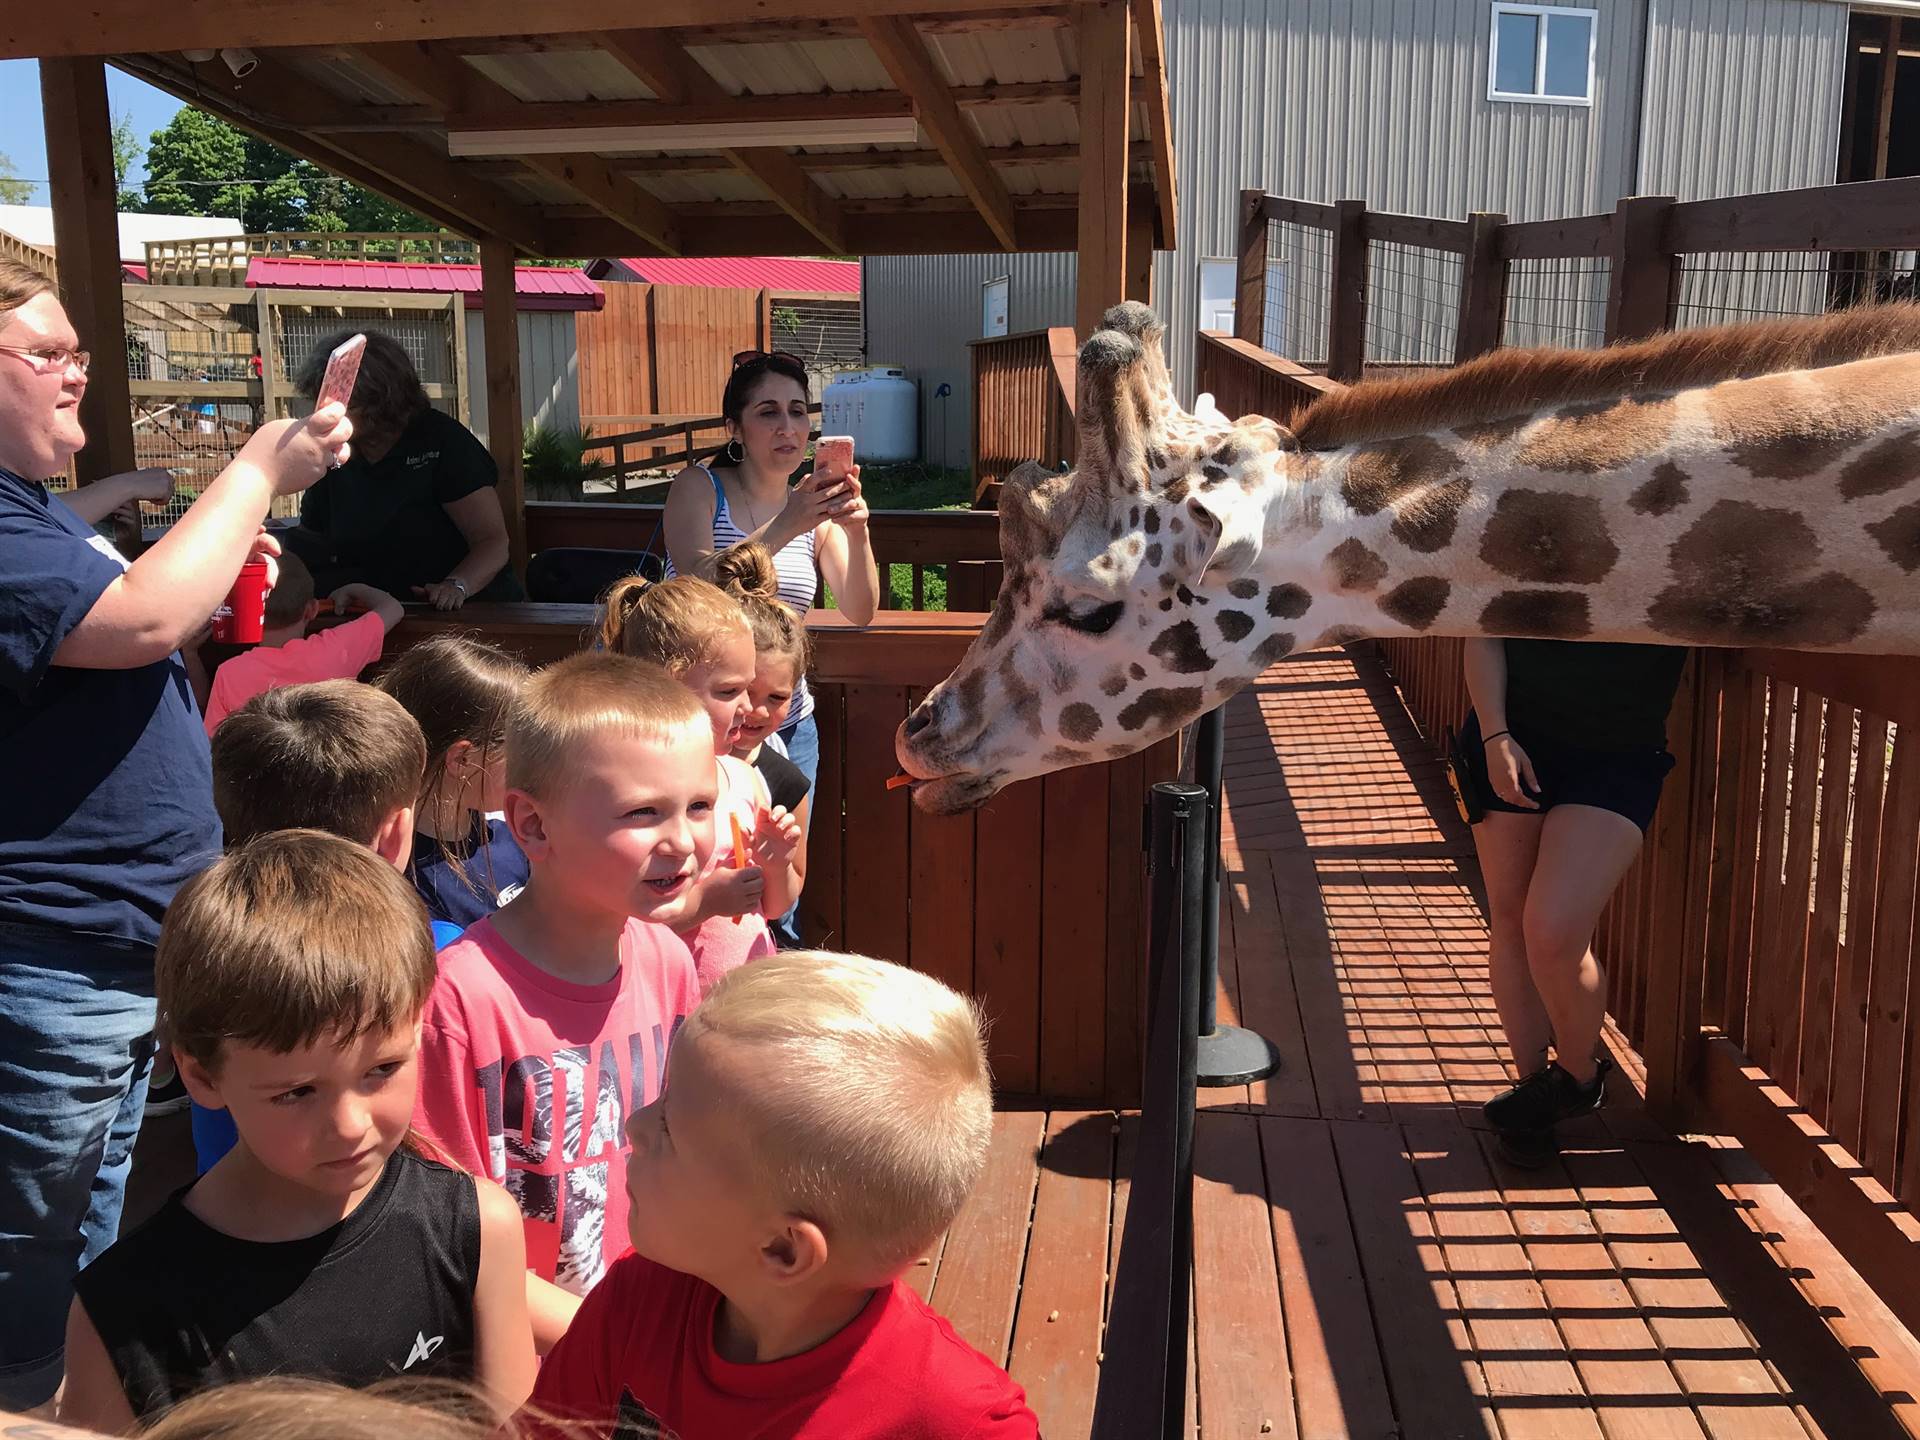 Students feed the giraffes a carrot nibble